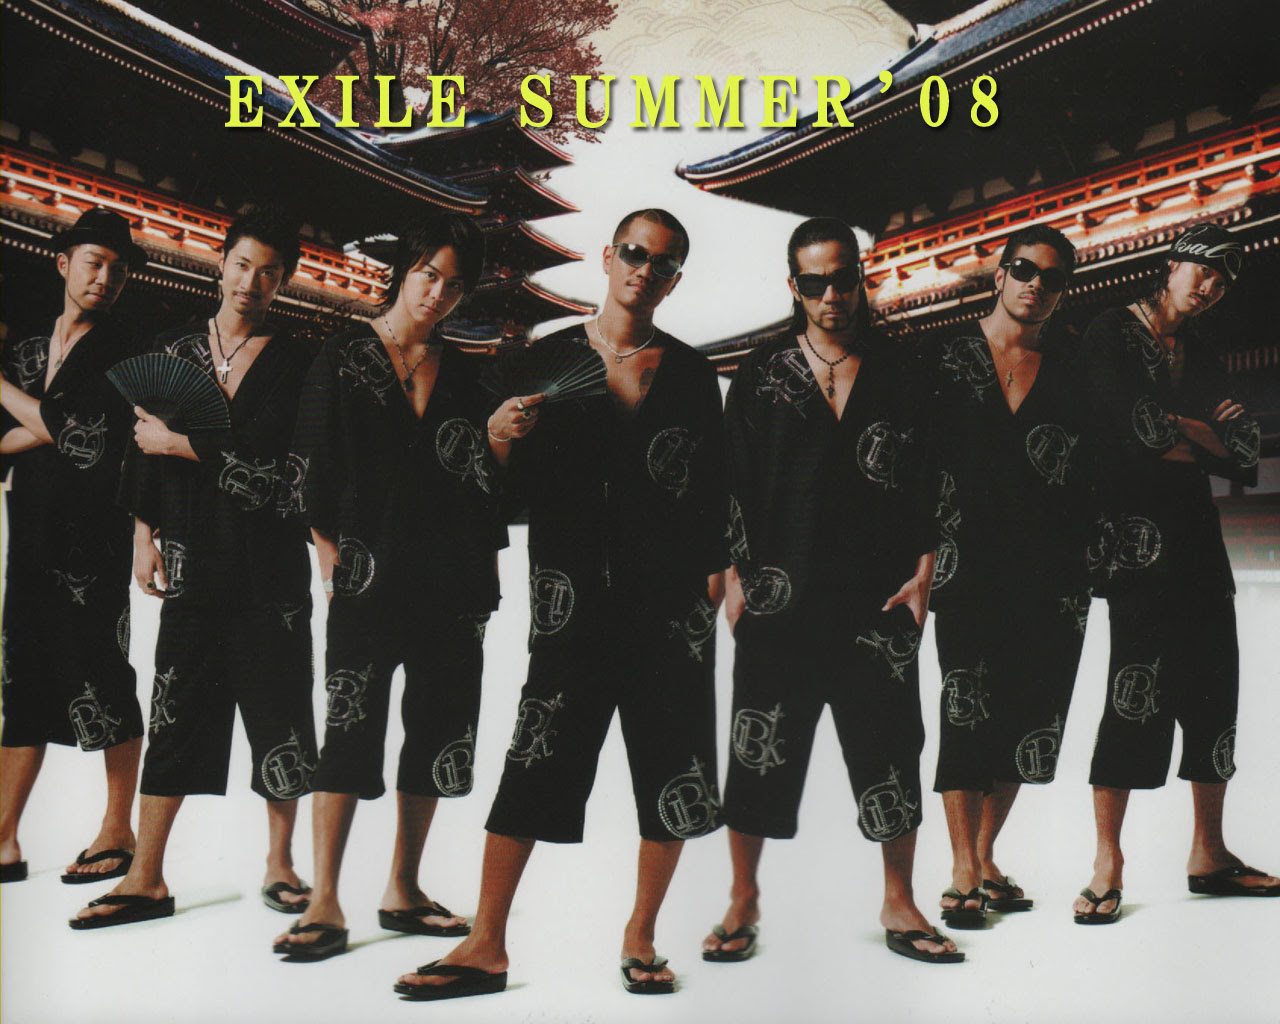 Exile 壁紙 スマホ Theyoungstersjournals